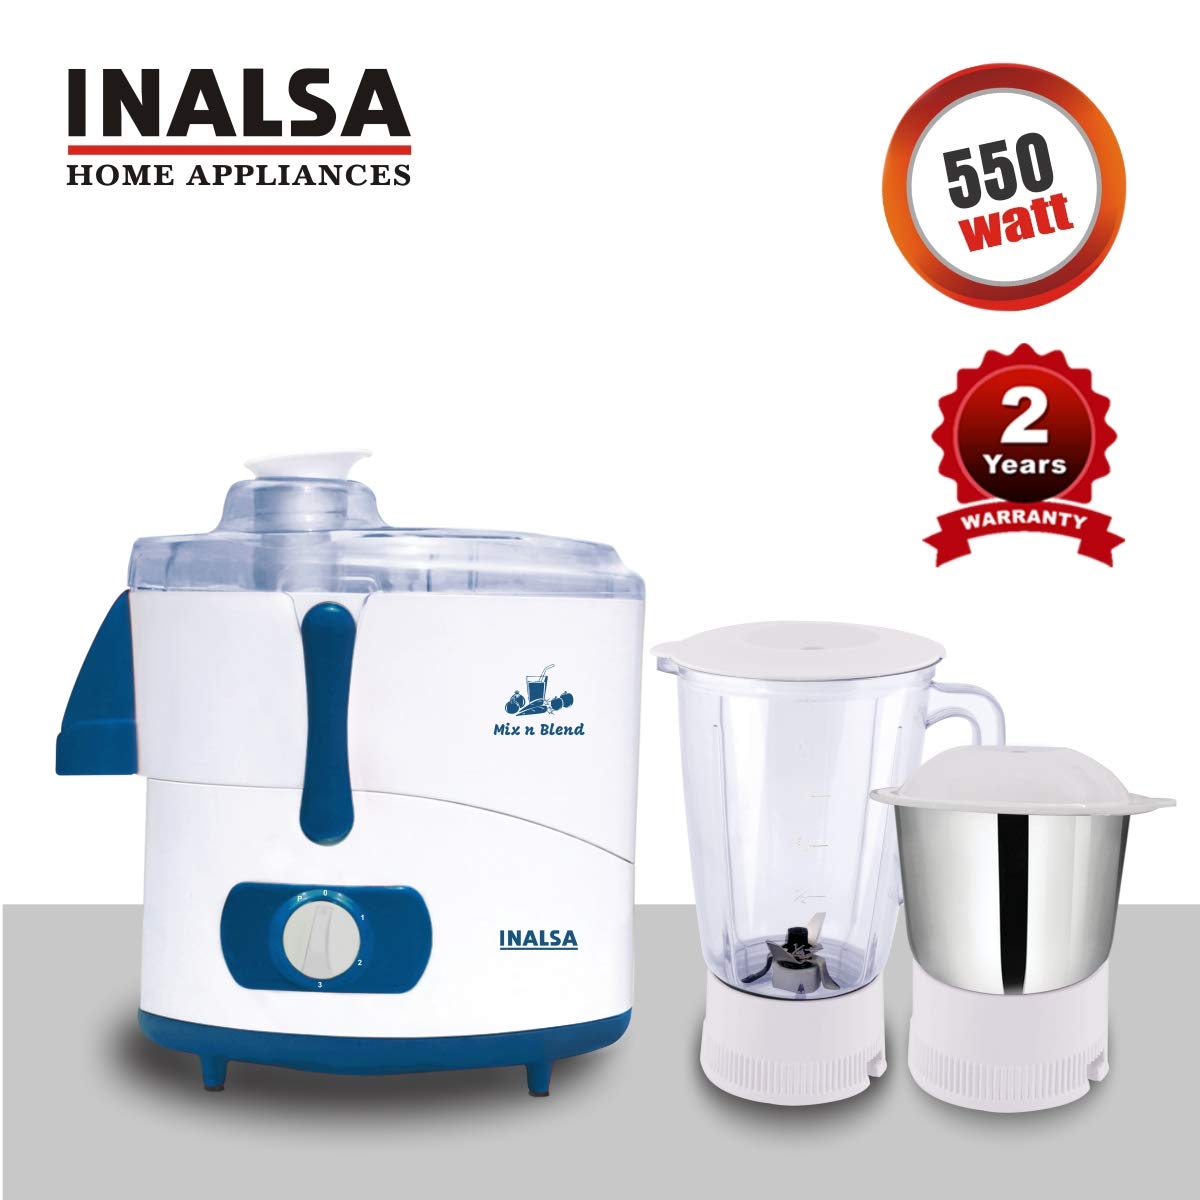 INALSA Juicer Mixer Grinder MIX N BLEND - 550W With 2 Years Warranty